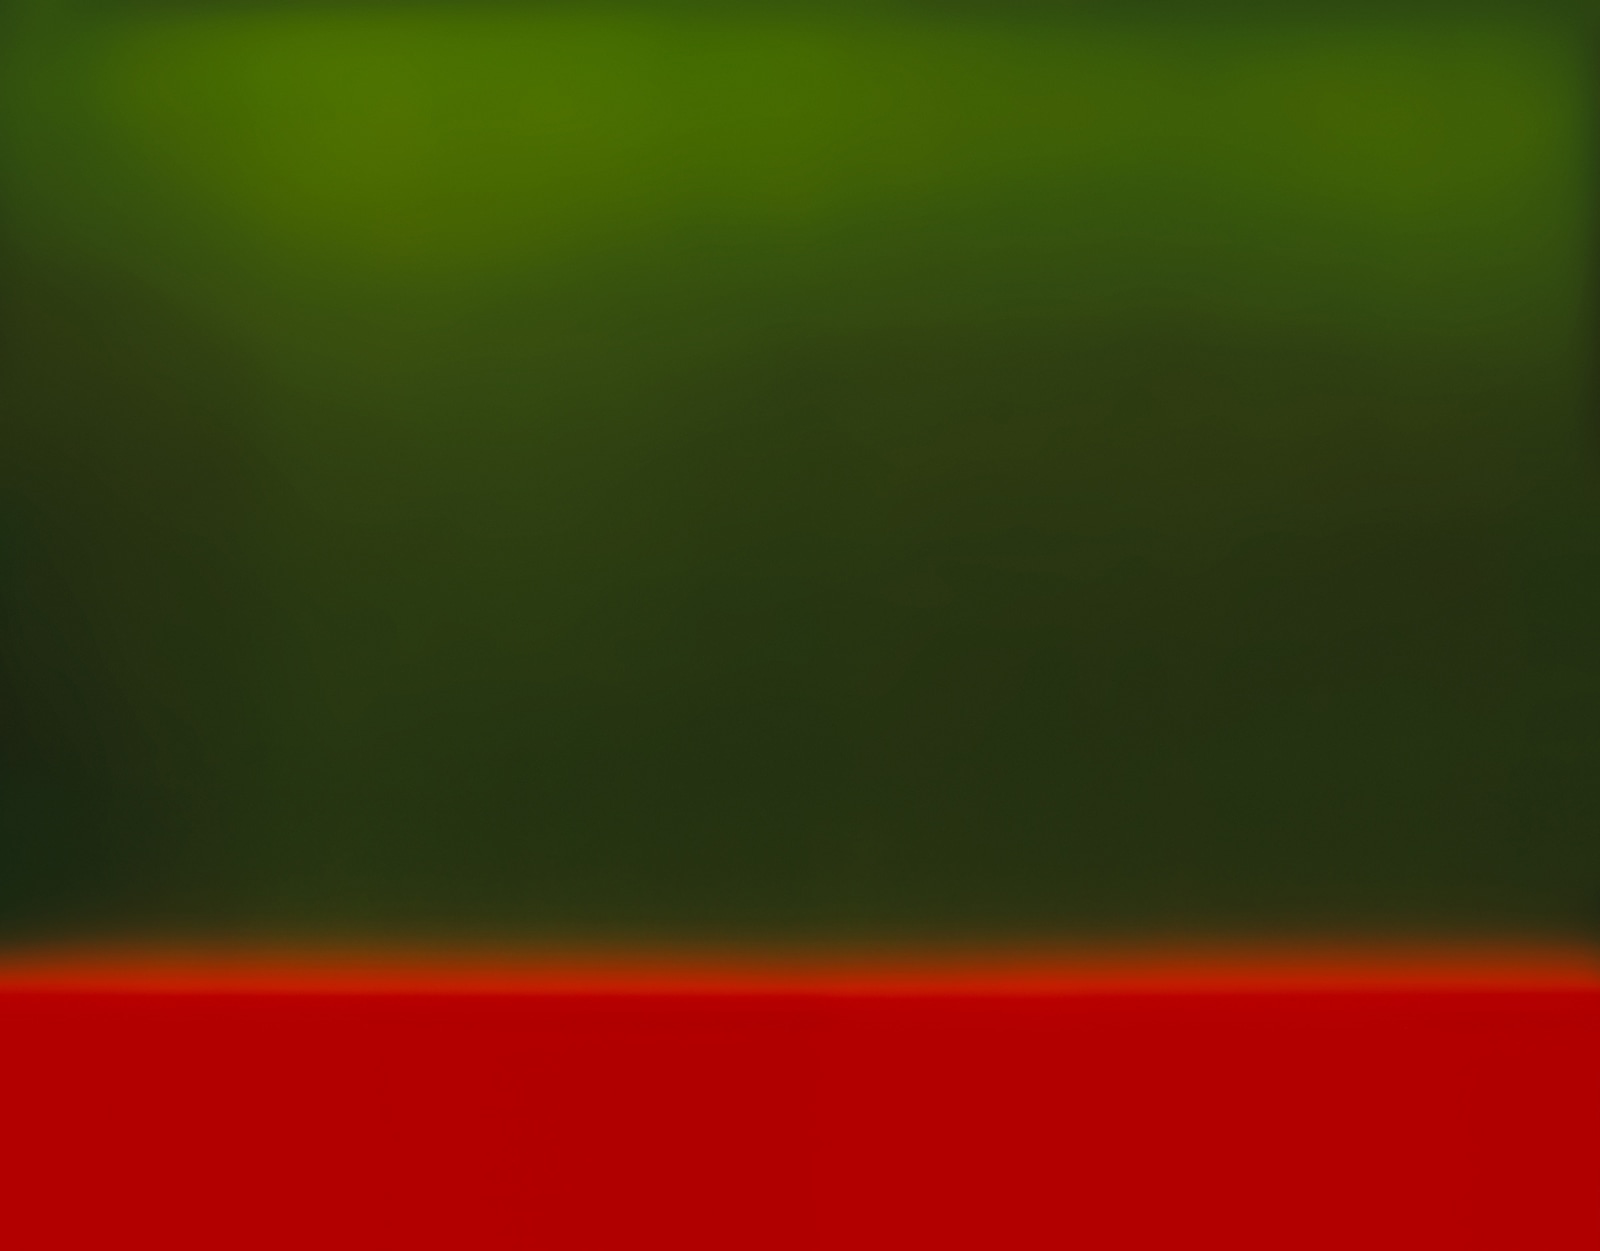 A color field which is mostly green with the bottom being red